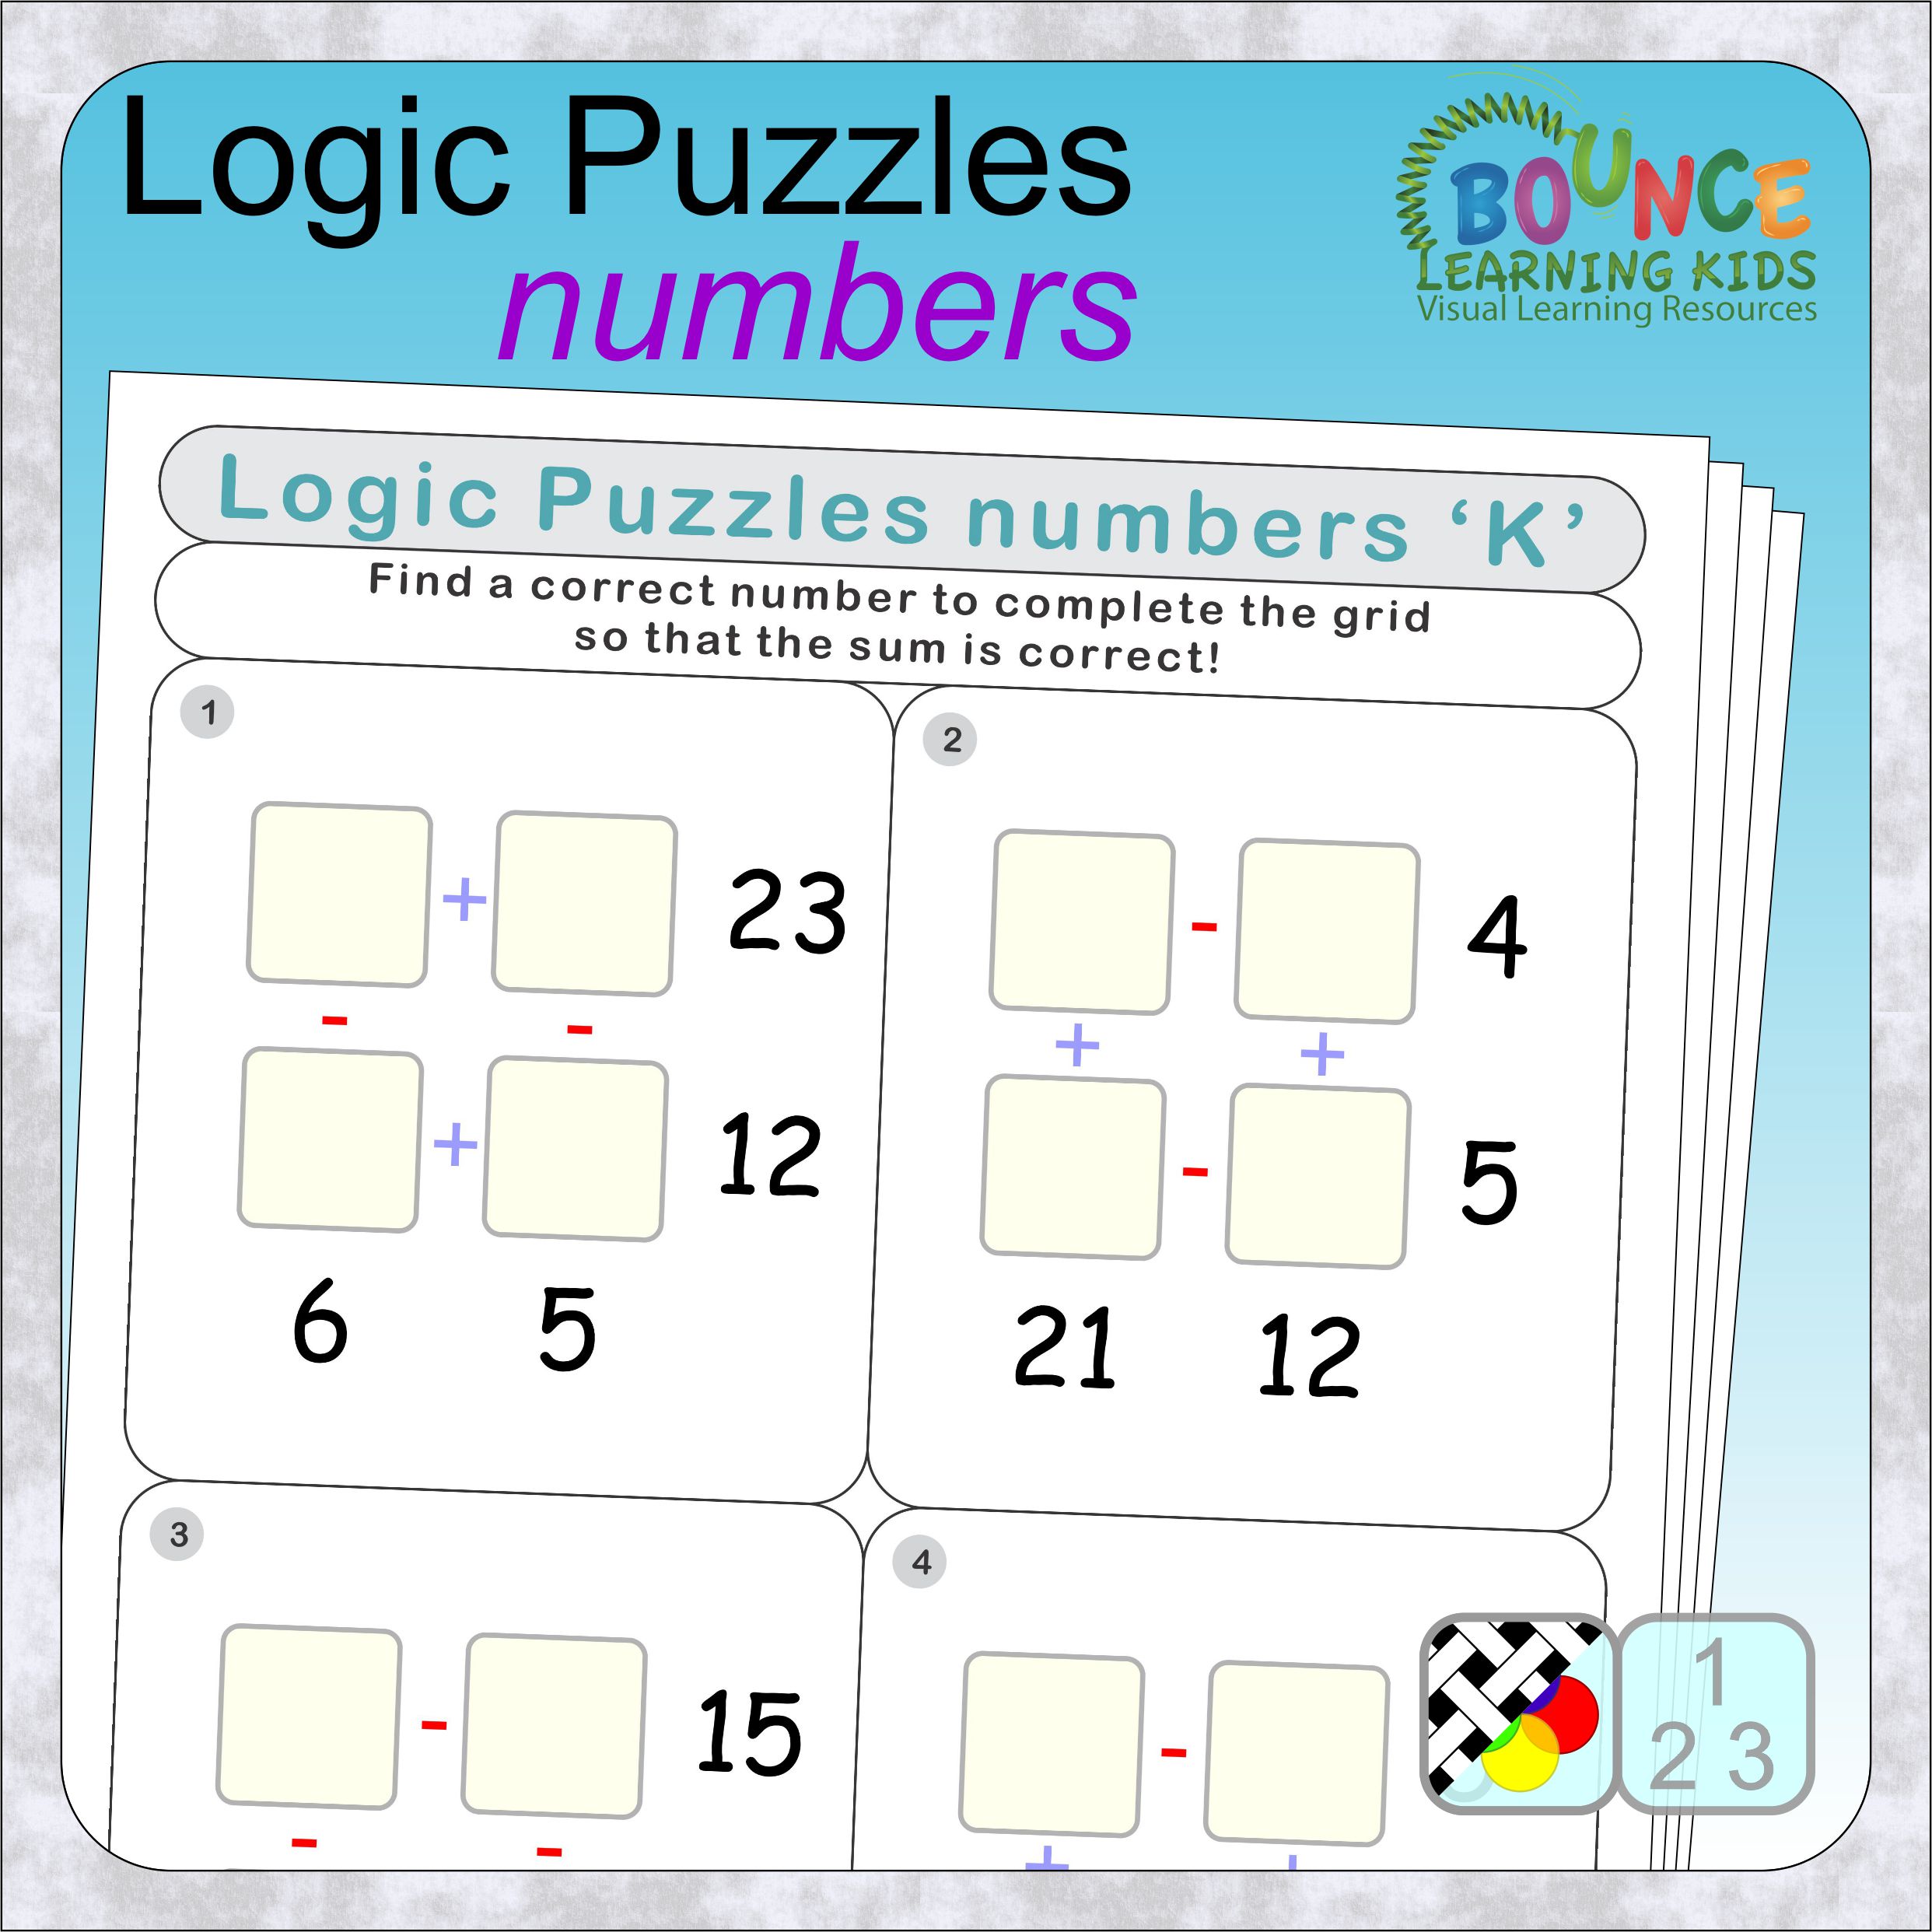 4 Fun Logic Puzzles Numbers Worksheets Series To Download